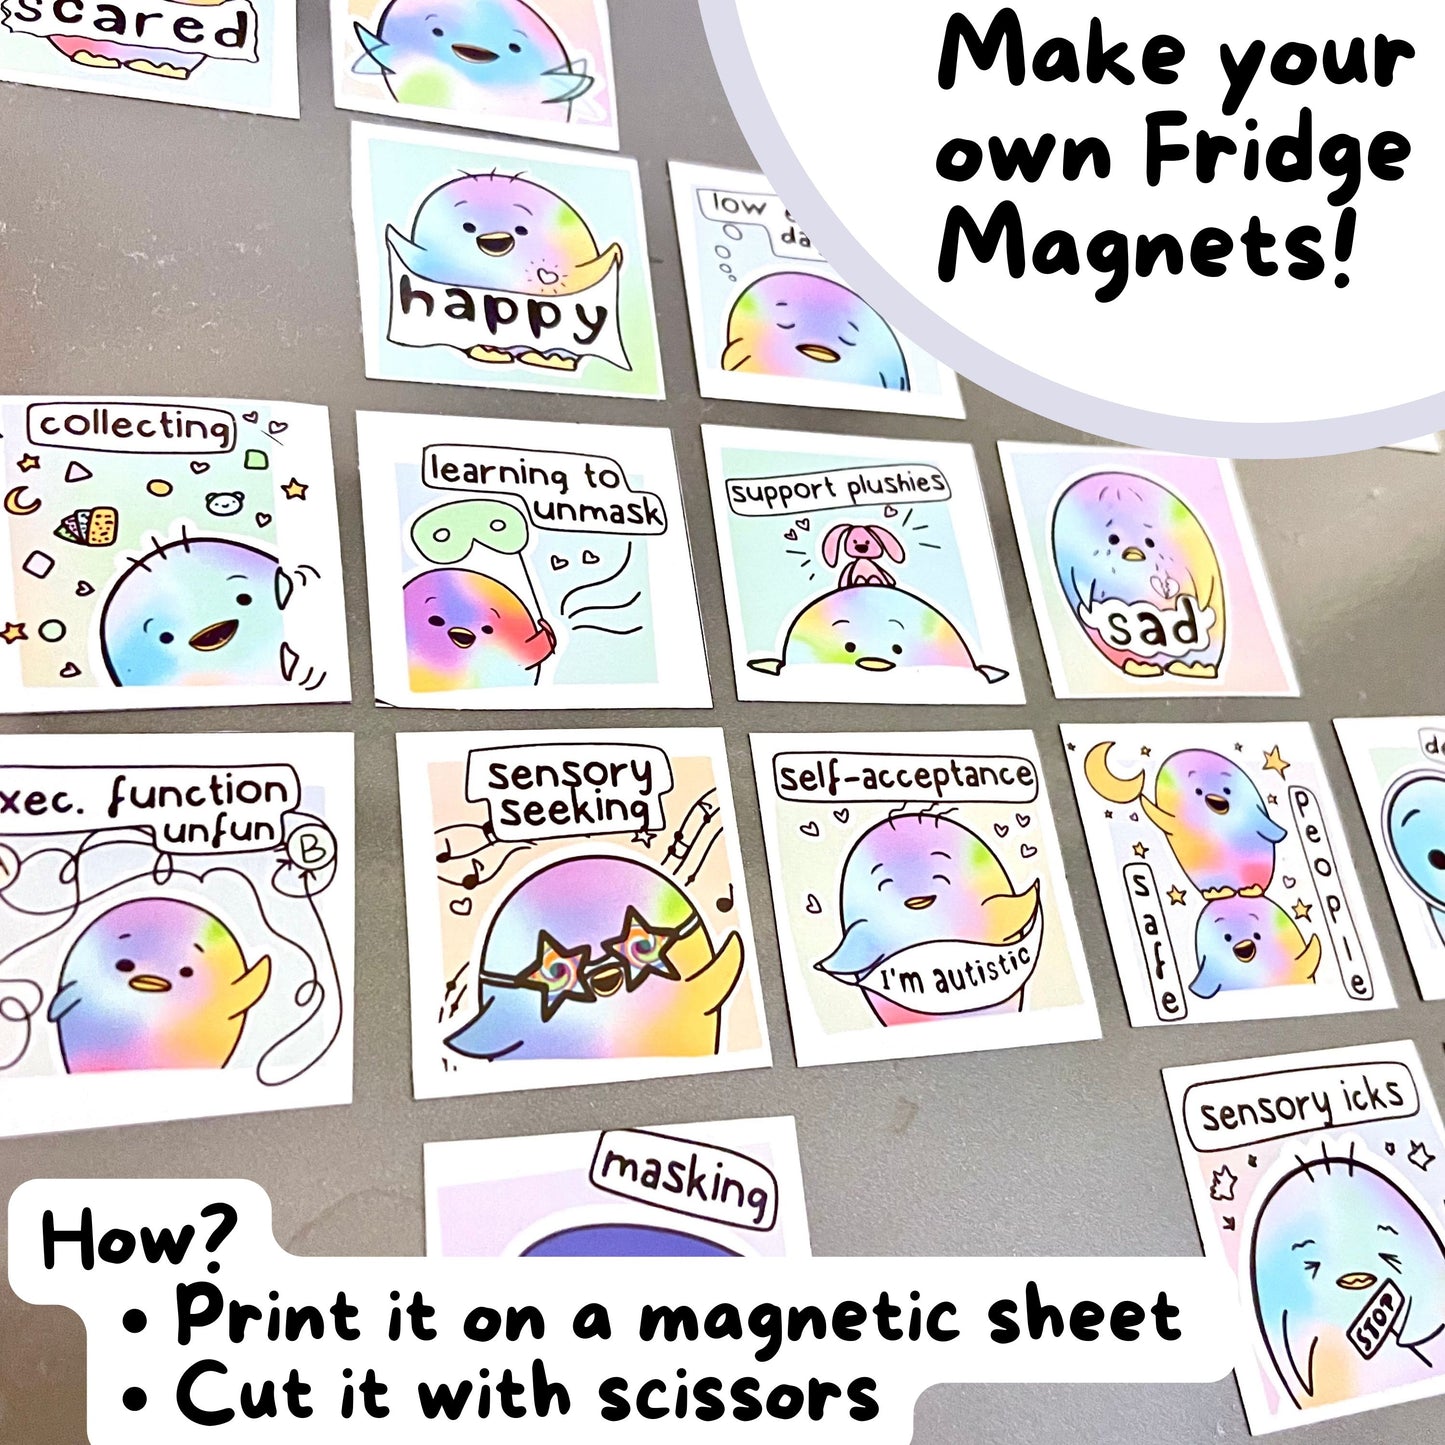 4. Print it on magnetic sheets, then cut it, and voila, you have your own Autism FRIDGE MAGNETS.